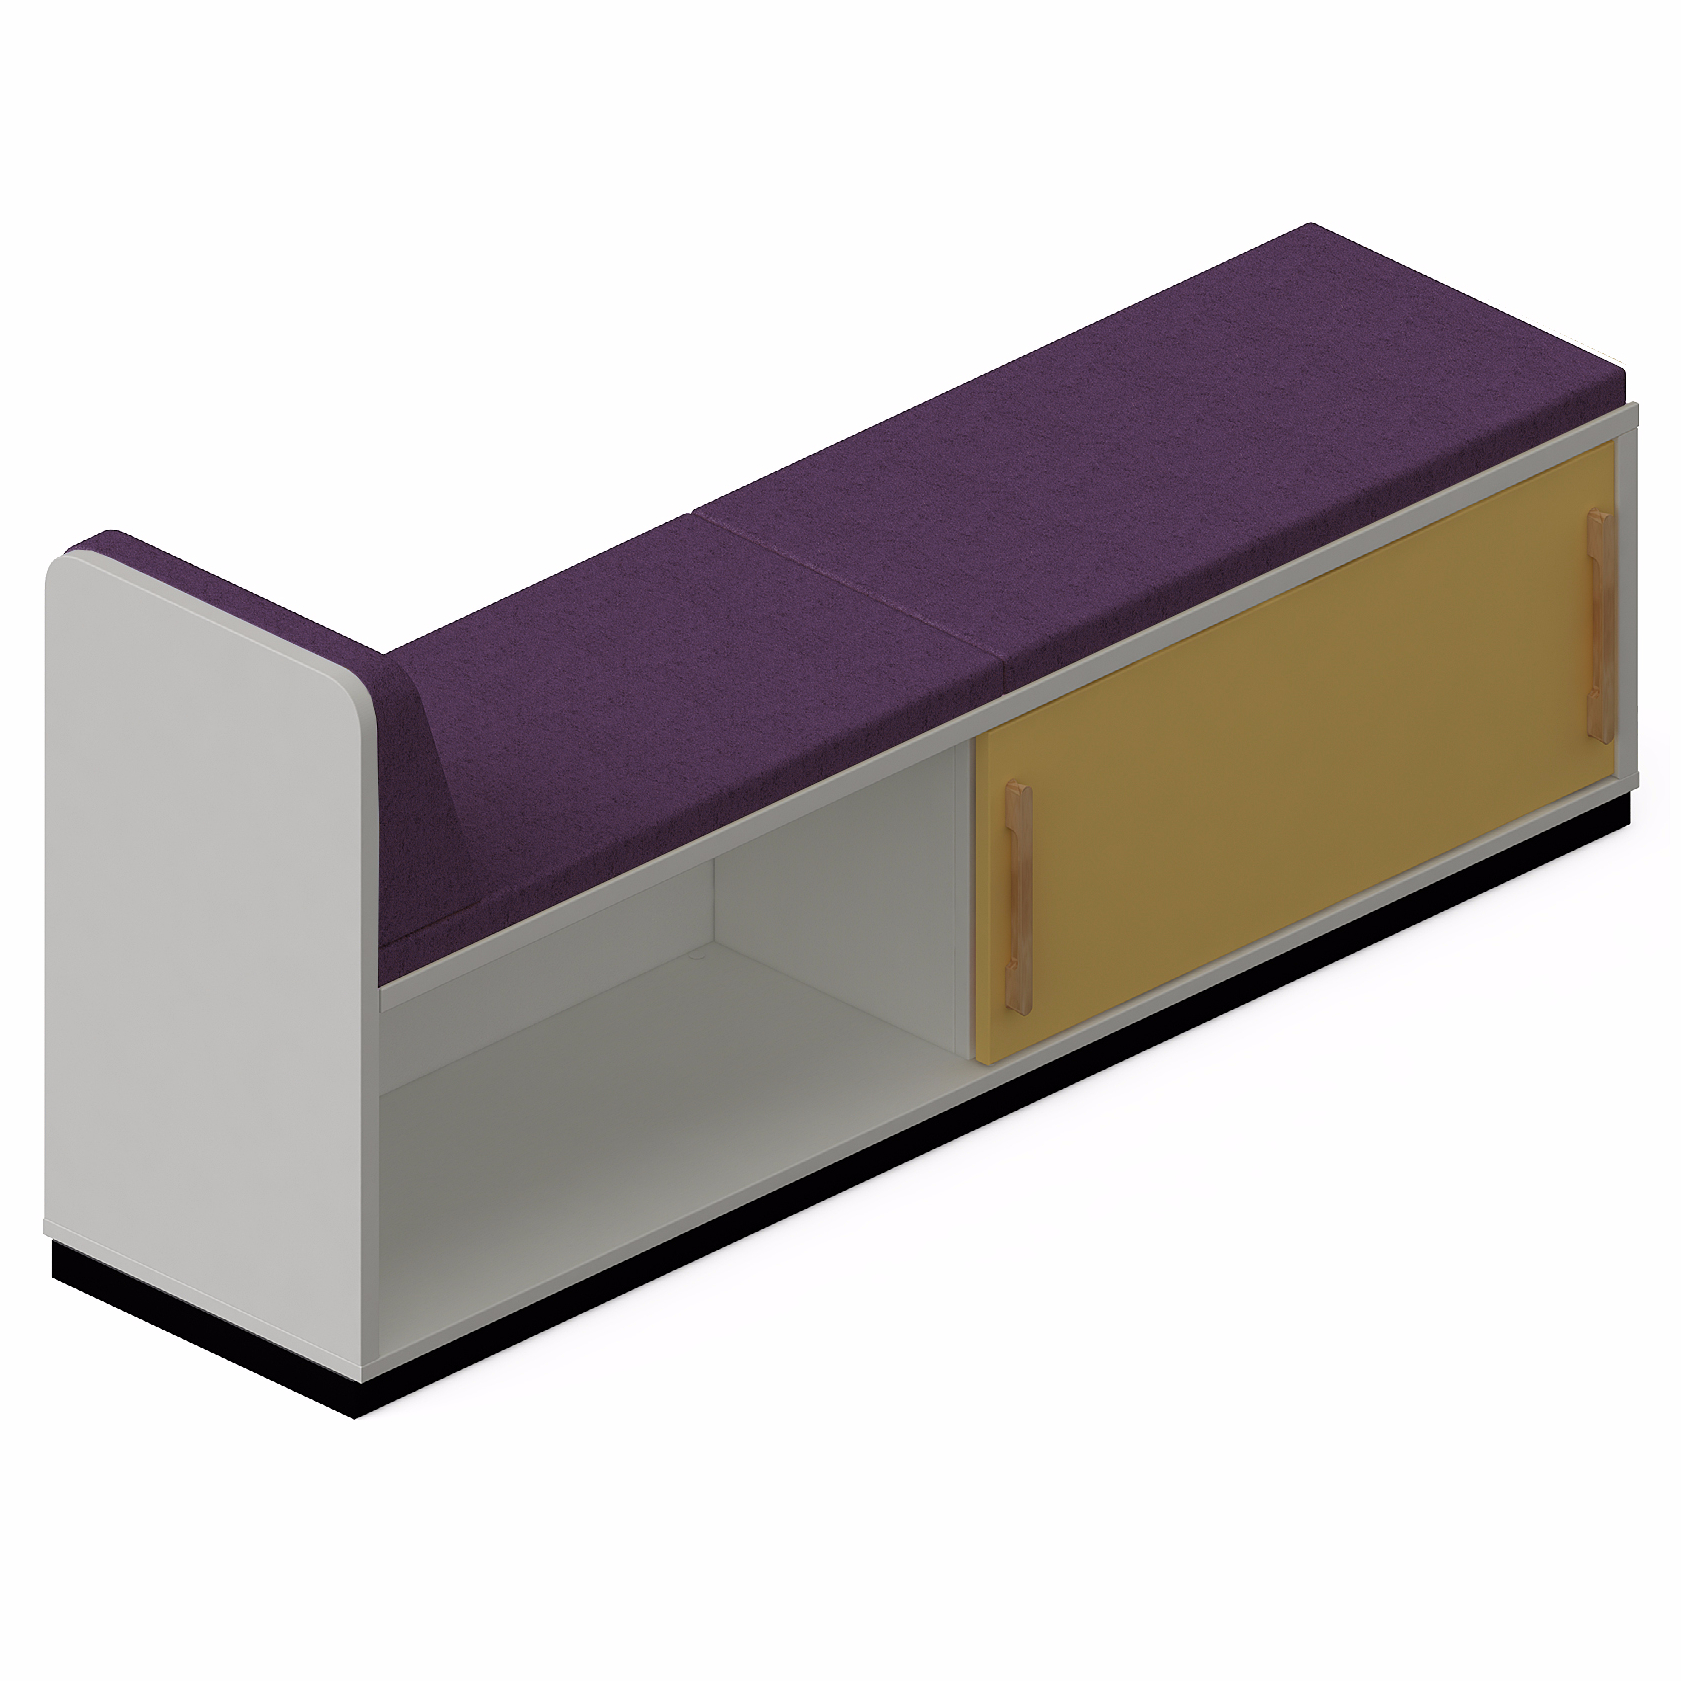 Banquette_assise_dossier_aubergine